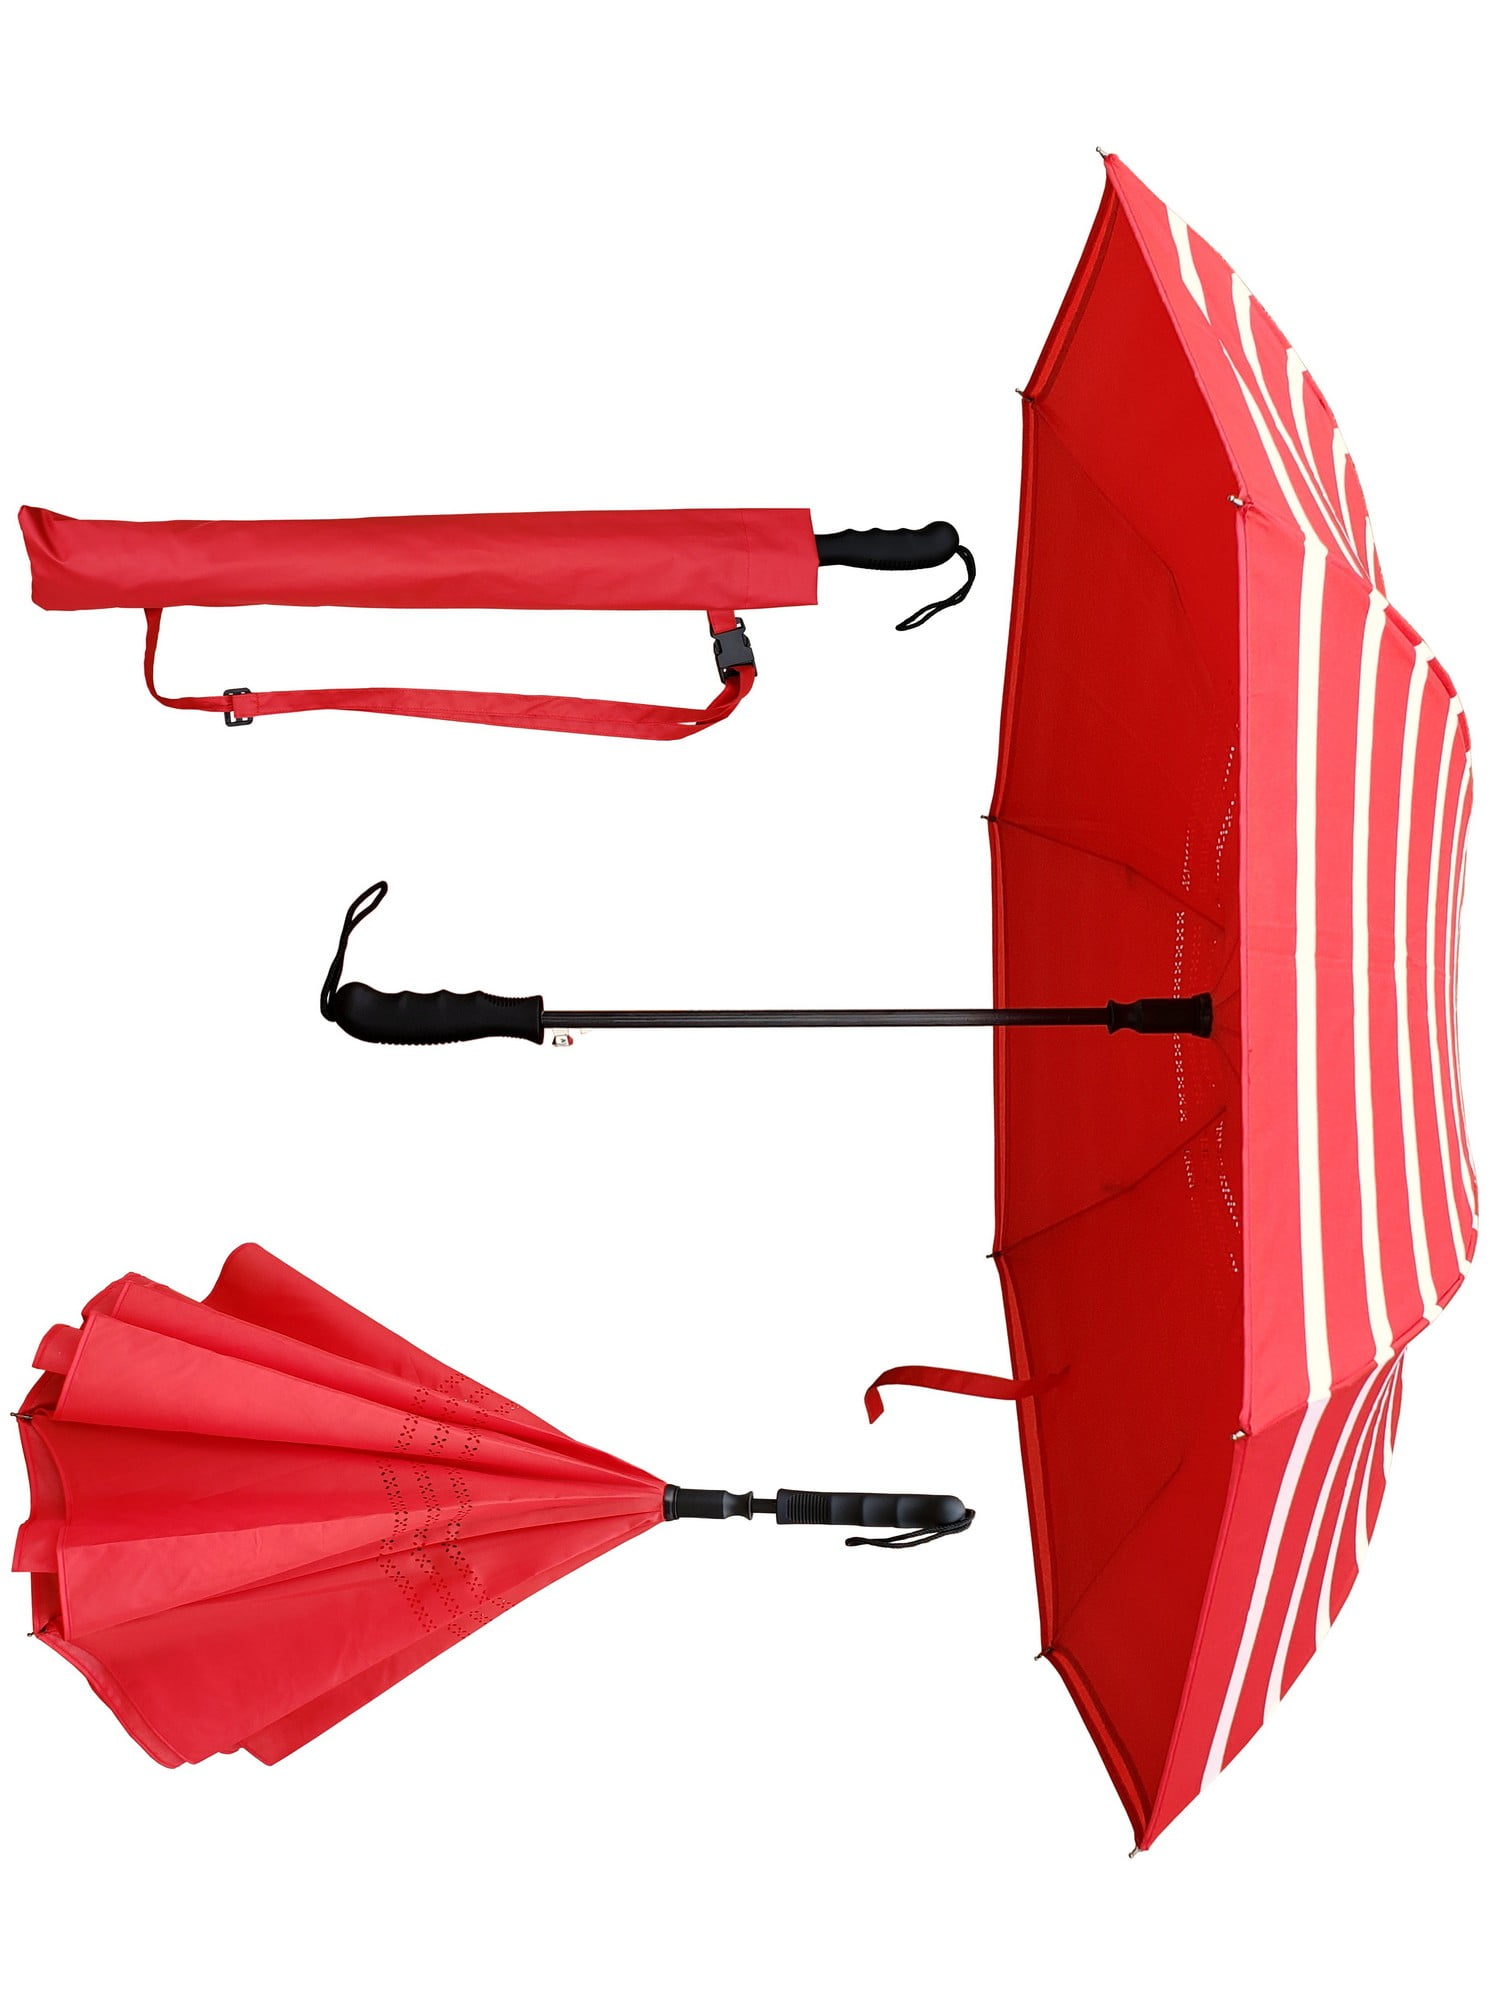 Auto Inverted Inside-Out Upside Down Red Stripe Umbrella-RainStoppers 46” Arc 